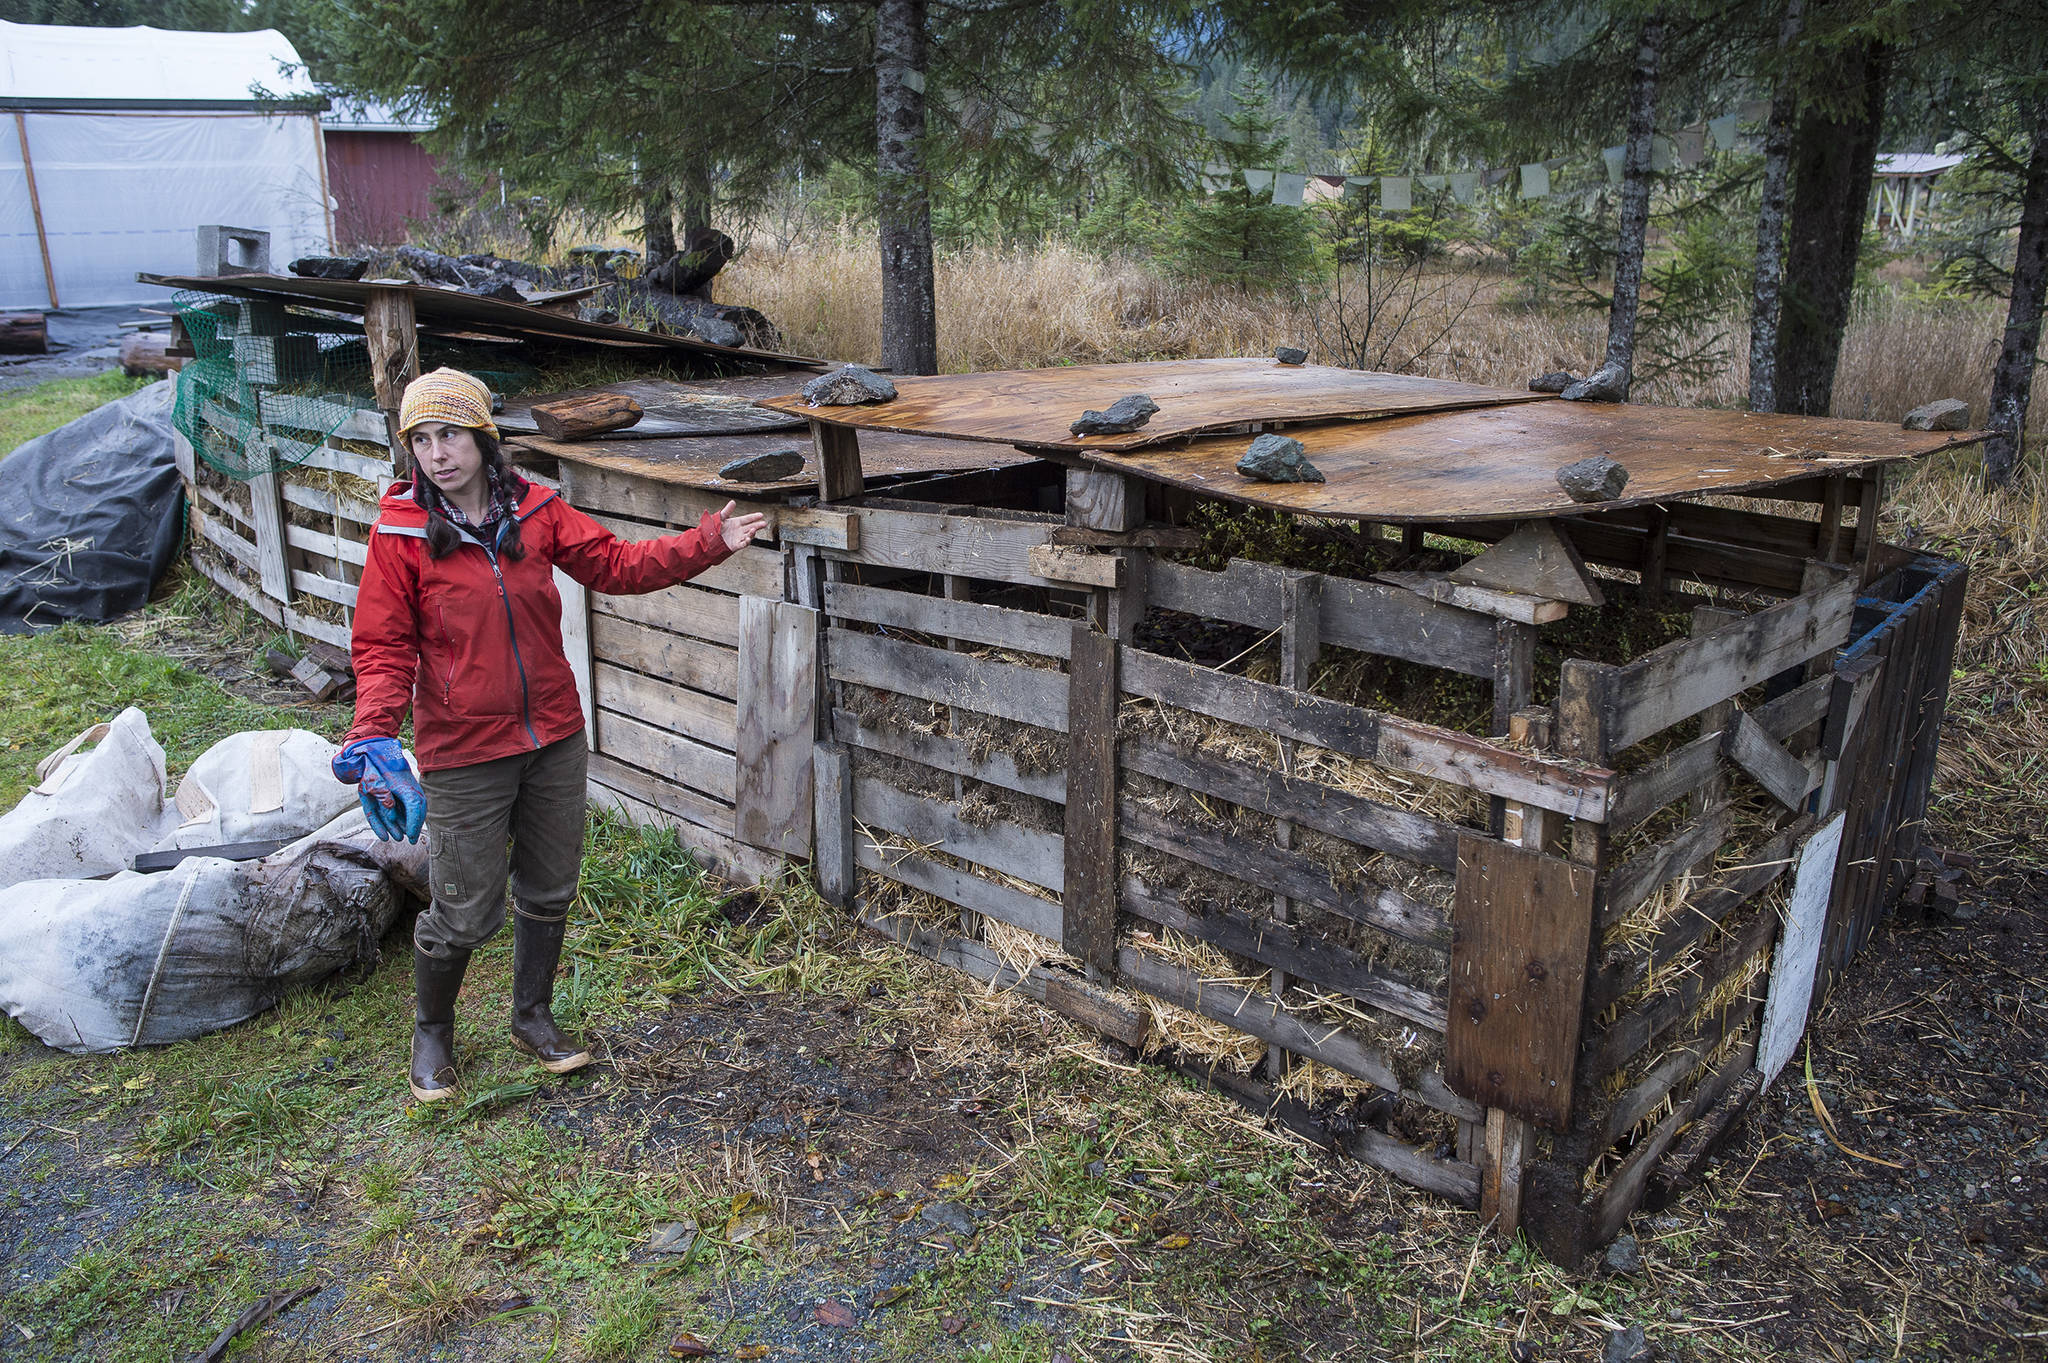 Juneau composting business wins $25K for sustainability